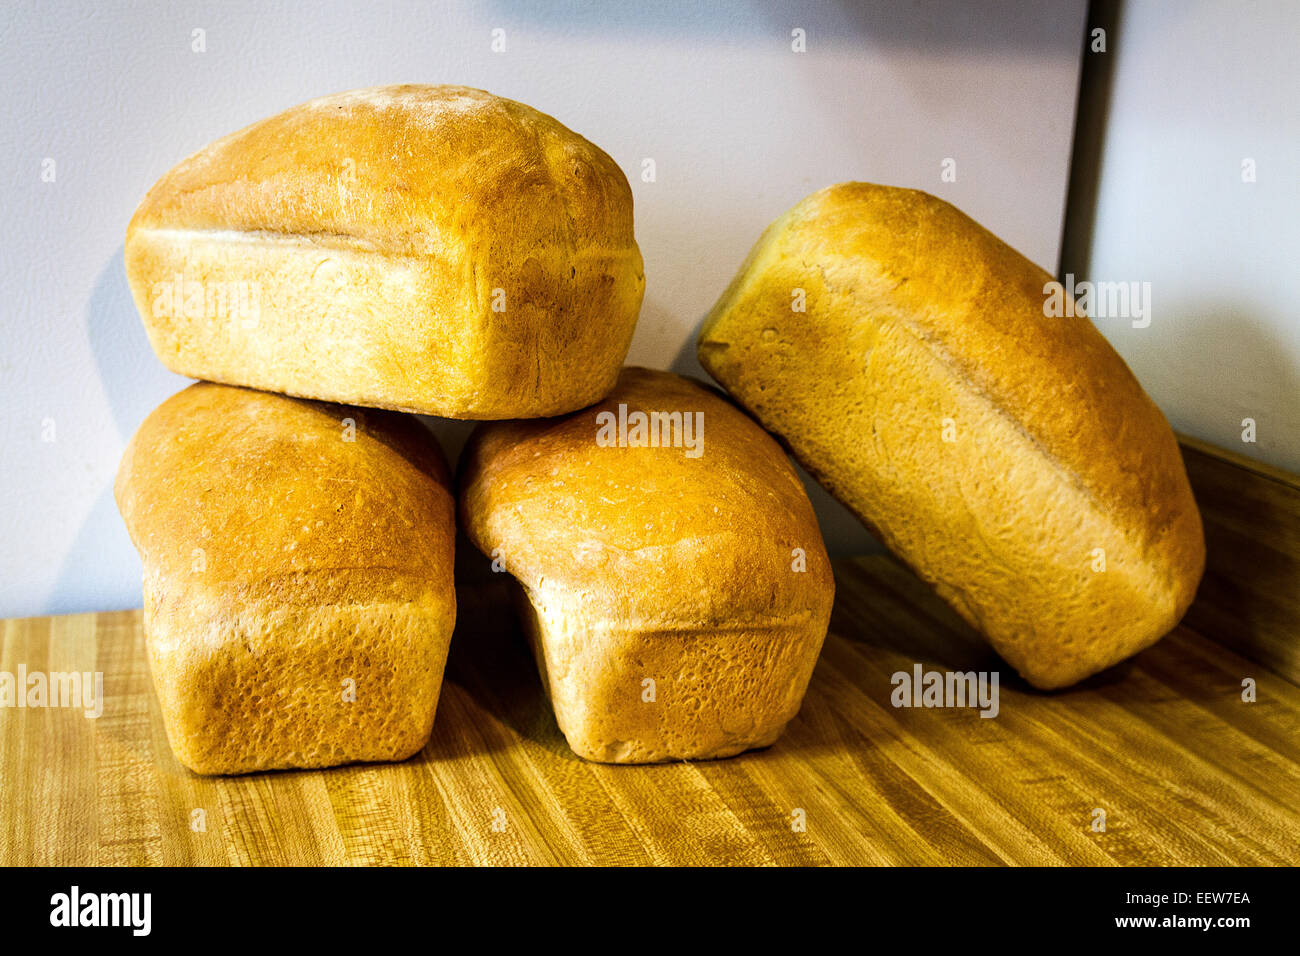 Freshly baked loaves of bread Stock Photo